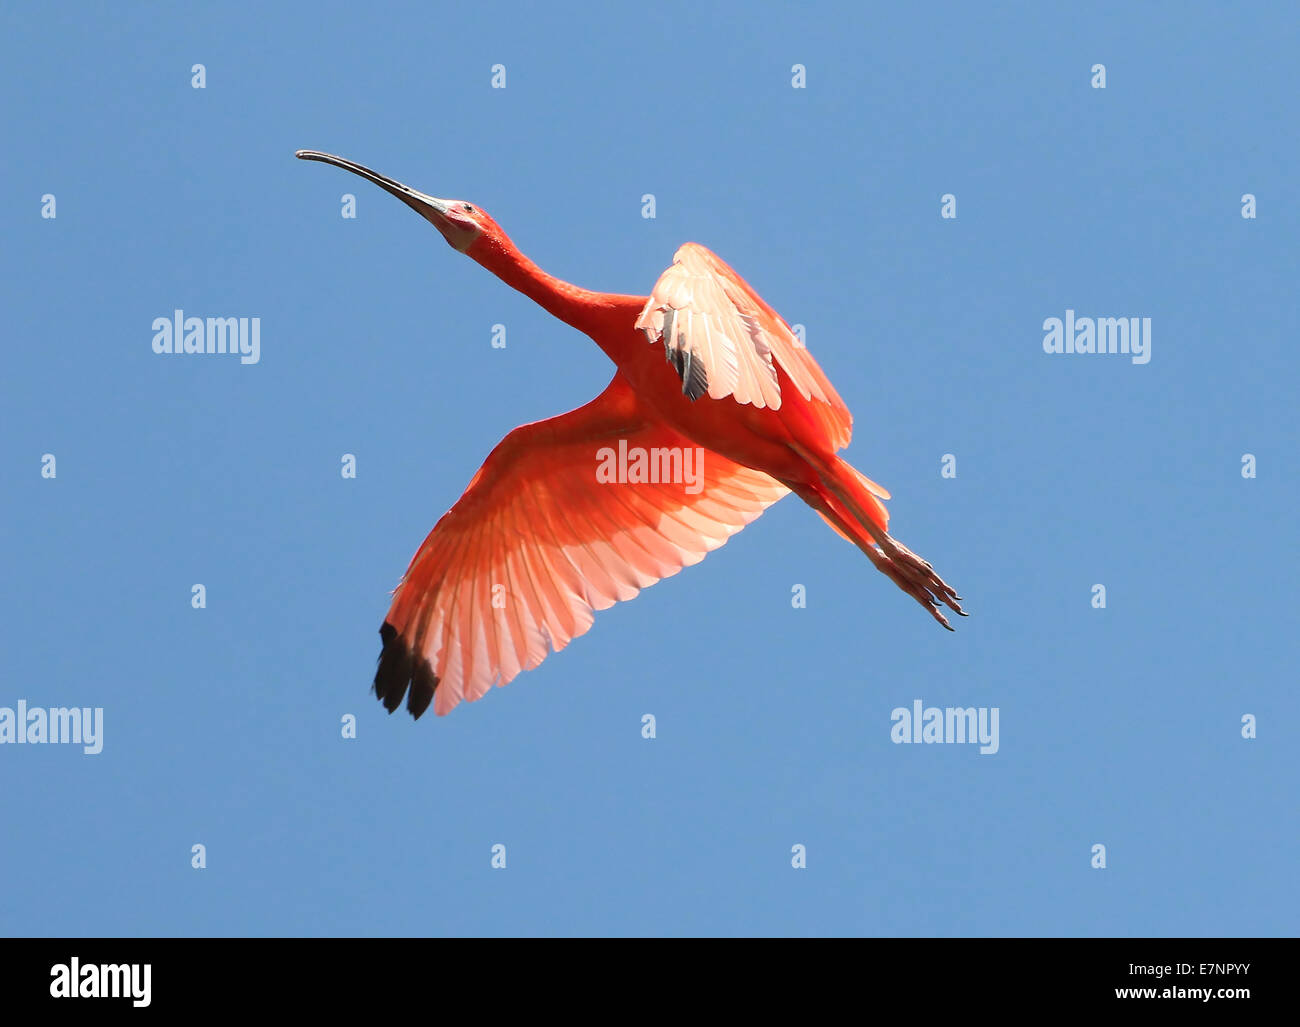 Close-up of a South American Scarlet Ibis (Eudocimus ruber) in flight against a blue sky Stock Photo